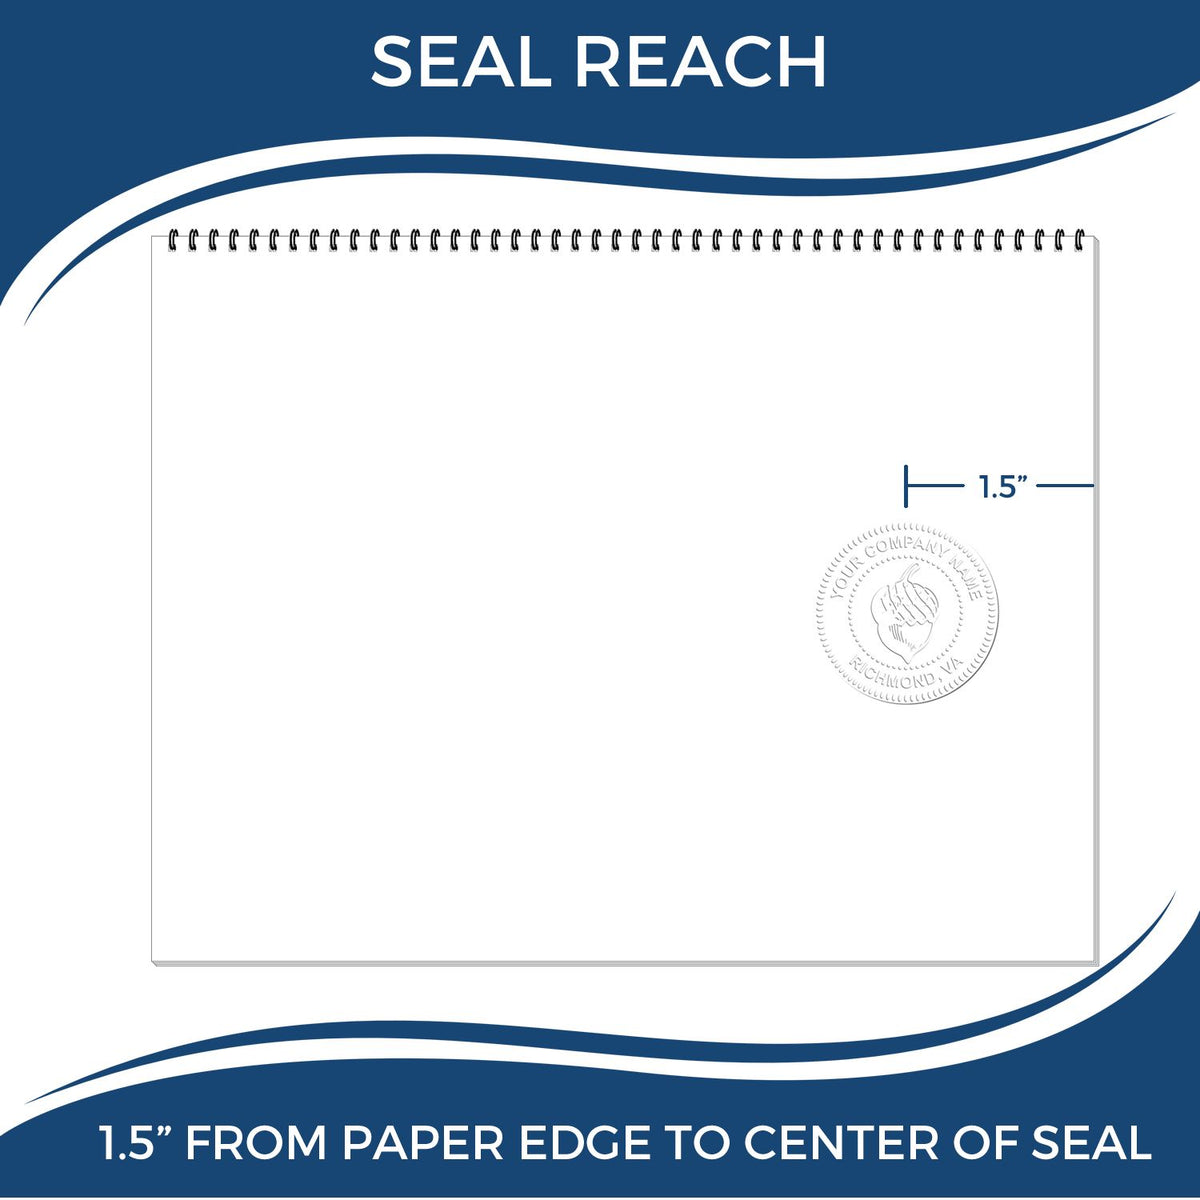 An infographic showing the seal reach which is represented by a ruler and a miniature seal image of the Hybrid Arizona Engineer Seal